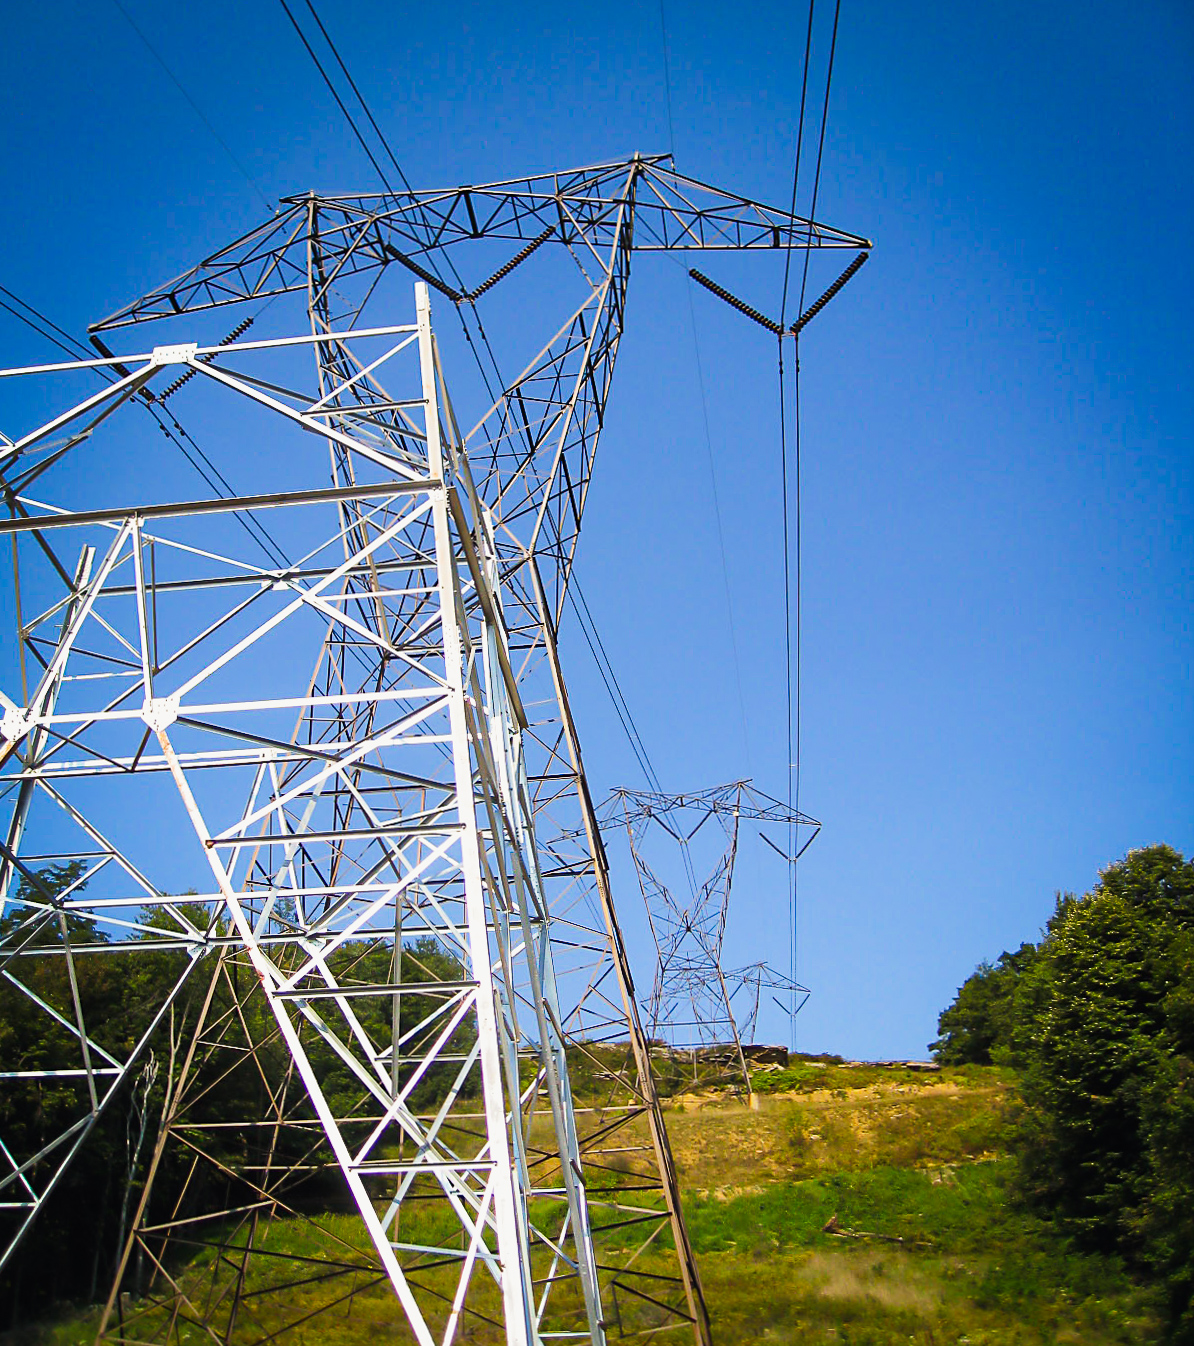 Transmission towers on a grassy hill